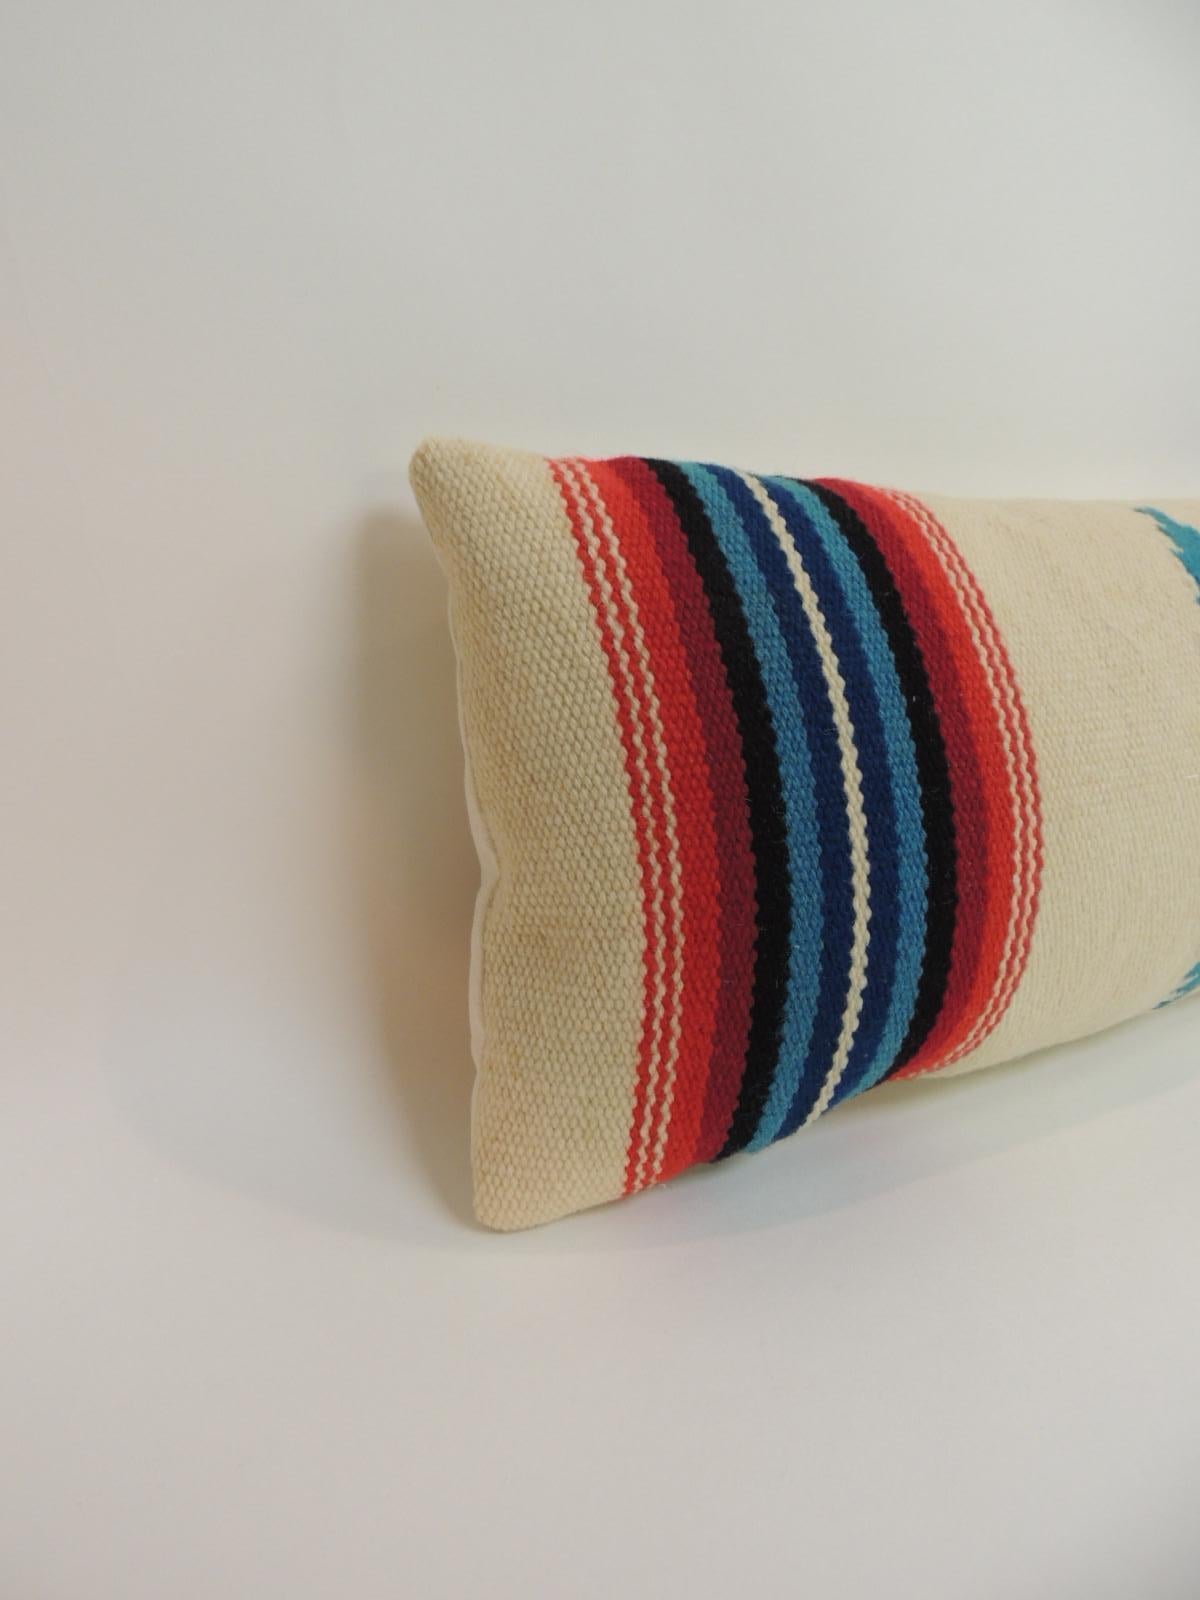 Vintage petite Southwestern woven wool decorative lumbar pillow.
Vintage petite Southwestern style stripe woven wool decorative lumbar pillow. Decorative lumbar cushion finished with natural linen backing. In shades of yellow, blue, royal blue,